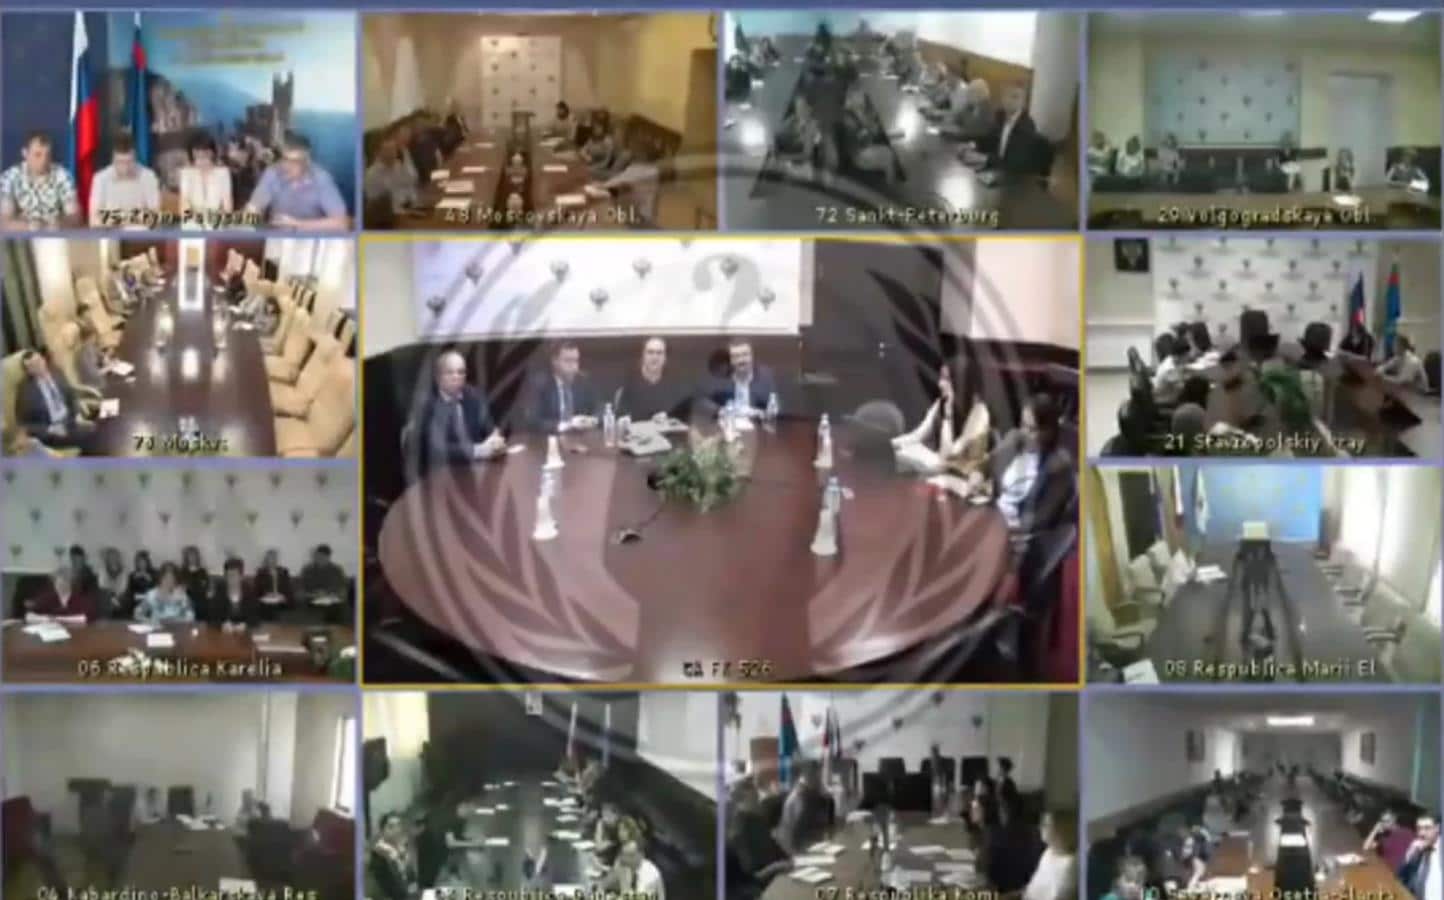 CCTV system in the Kremlin in the hands of Anonymous?